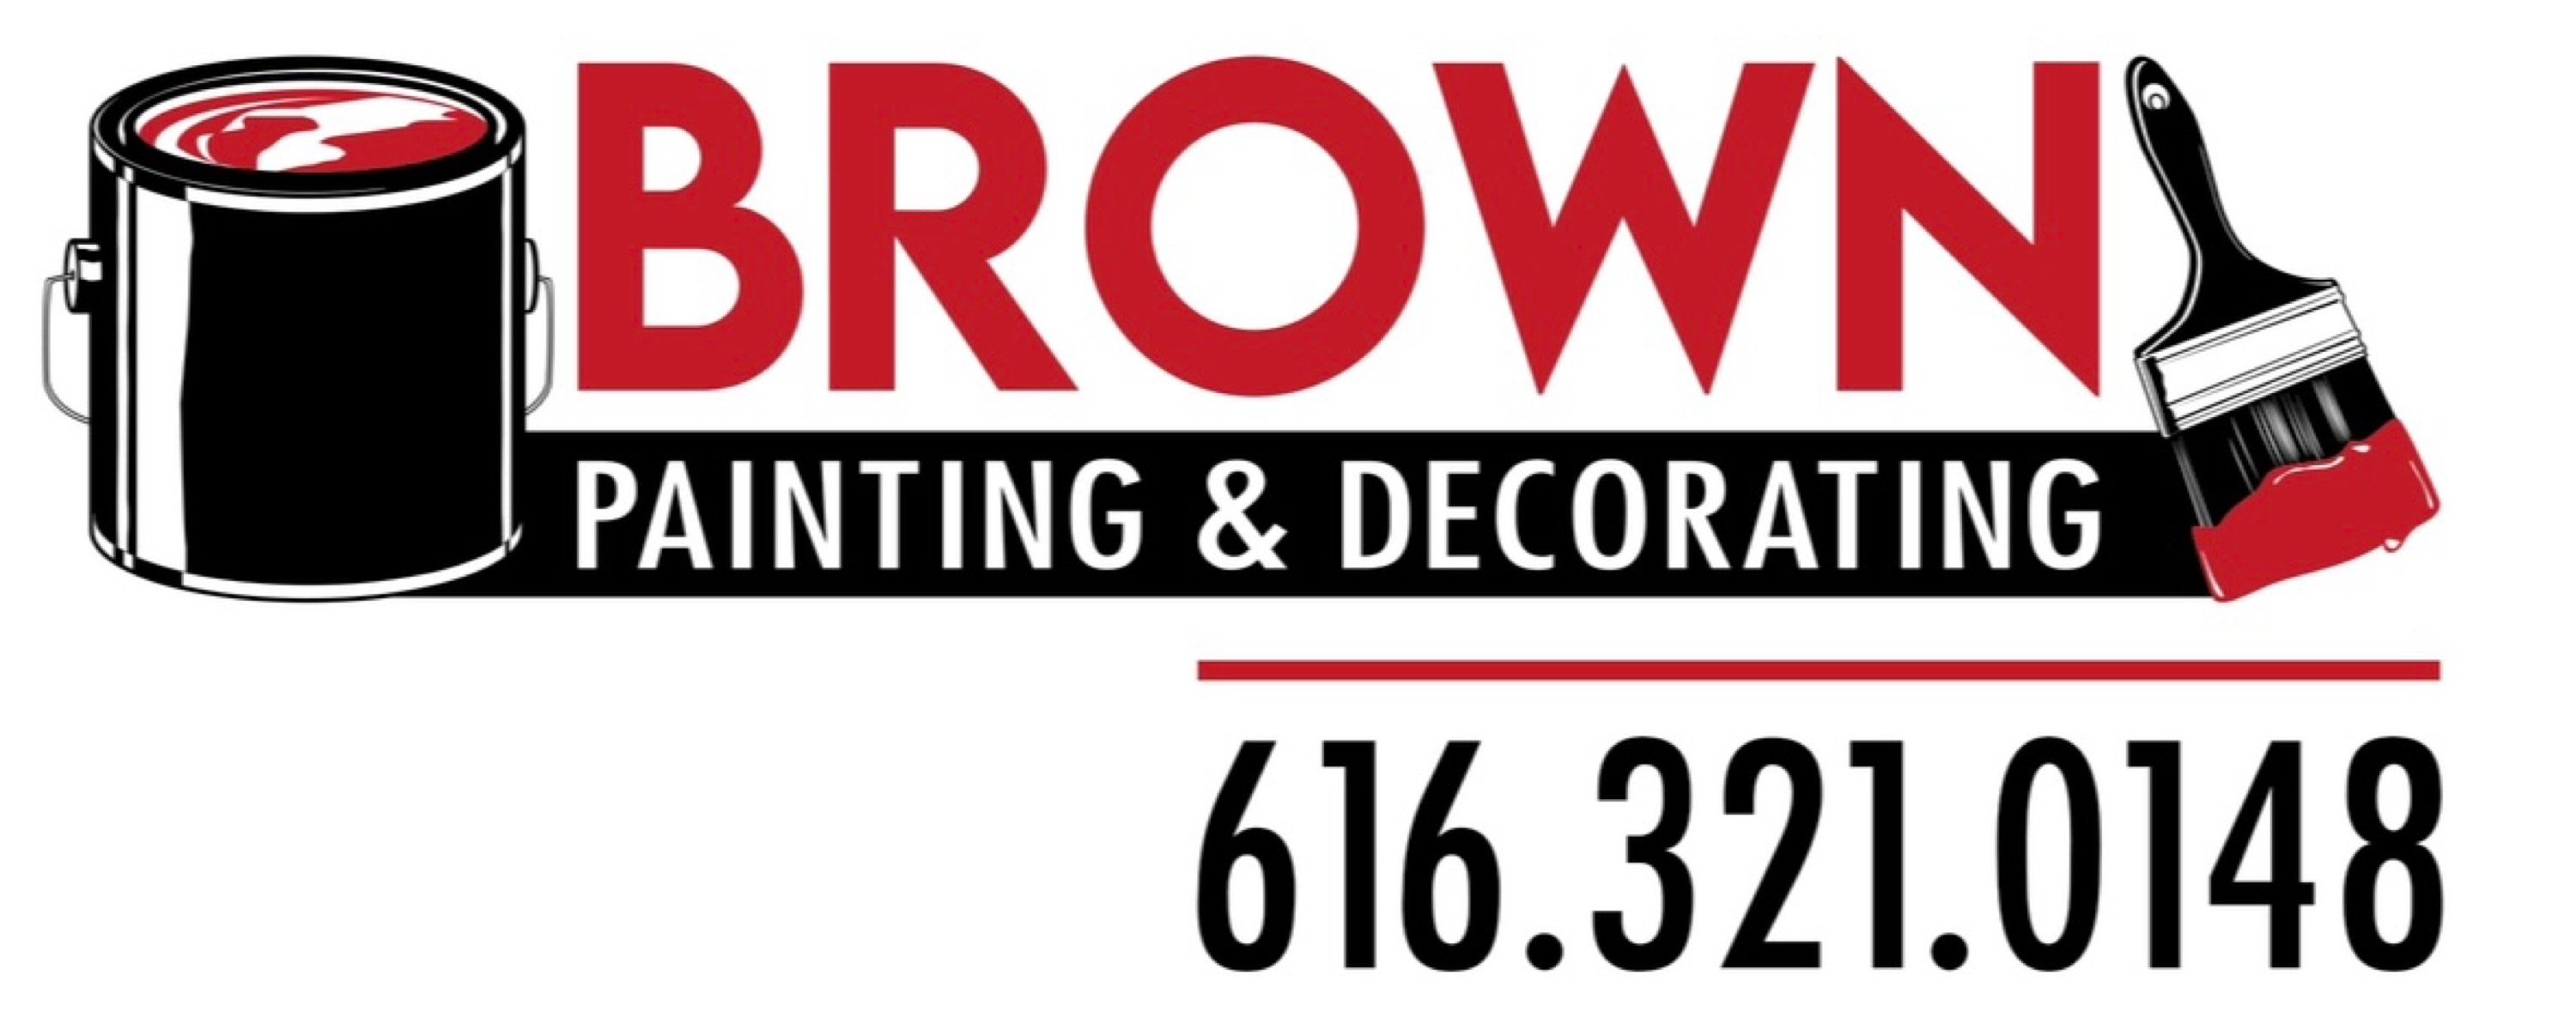 Brown Painting and Decorating, LLC Logo